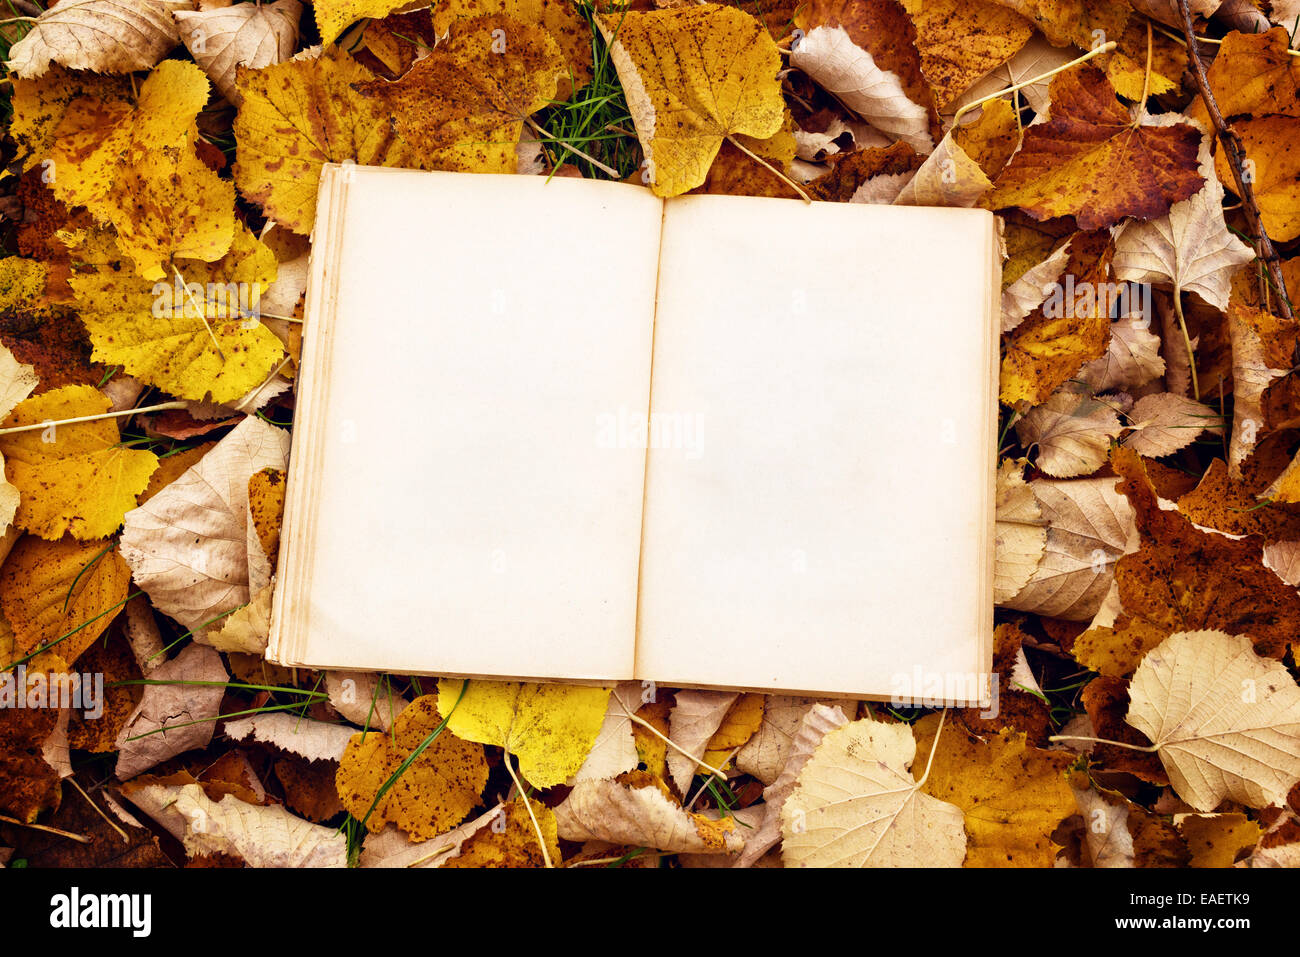 Vintage book with blank pages as copy space on fallen autumn leaves background Stock Photo